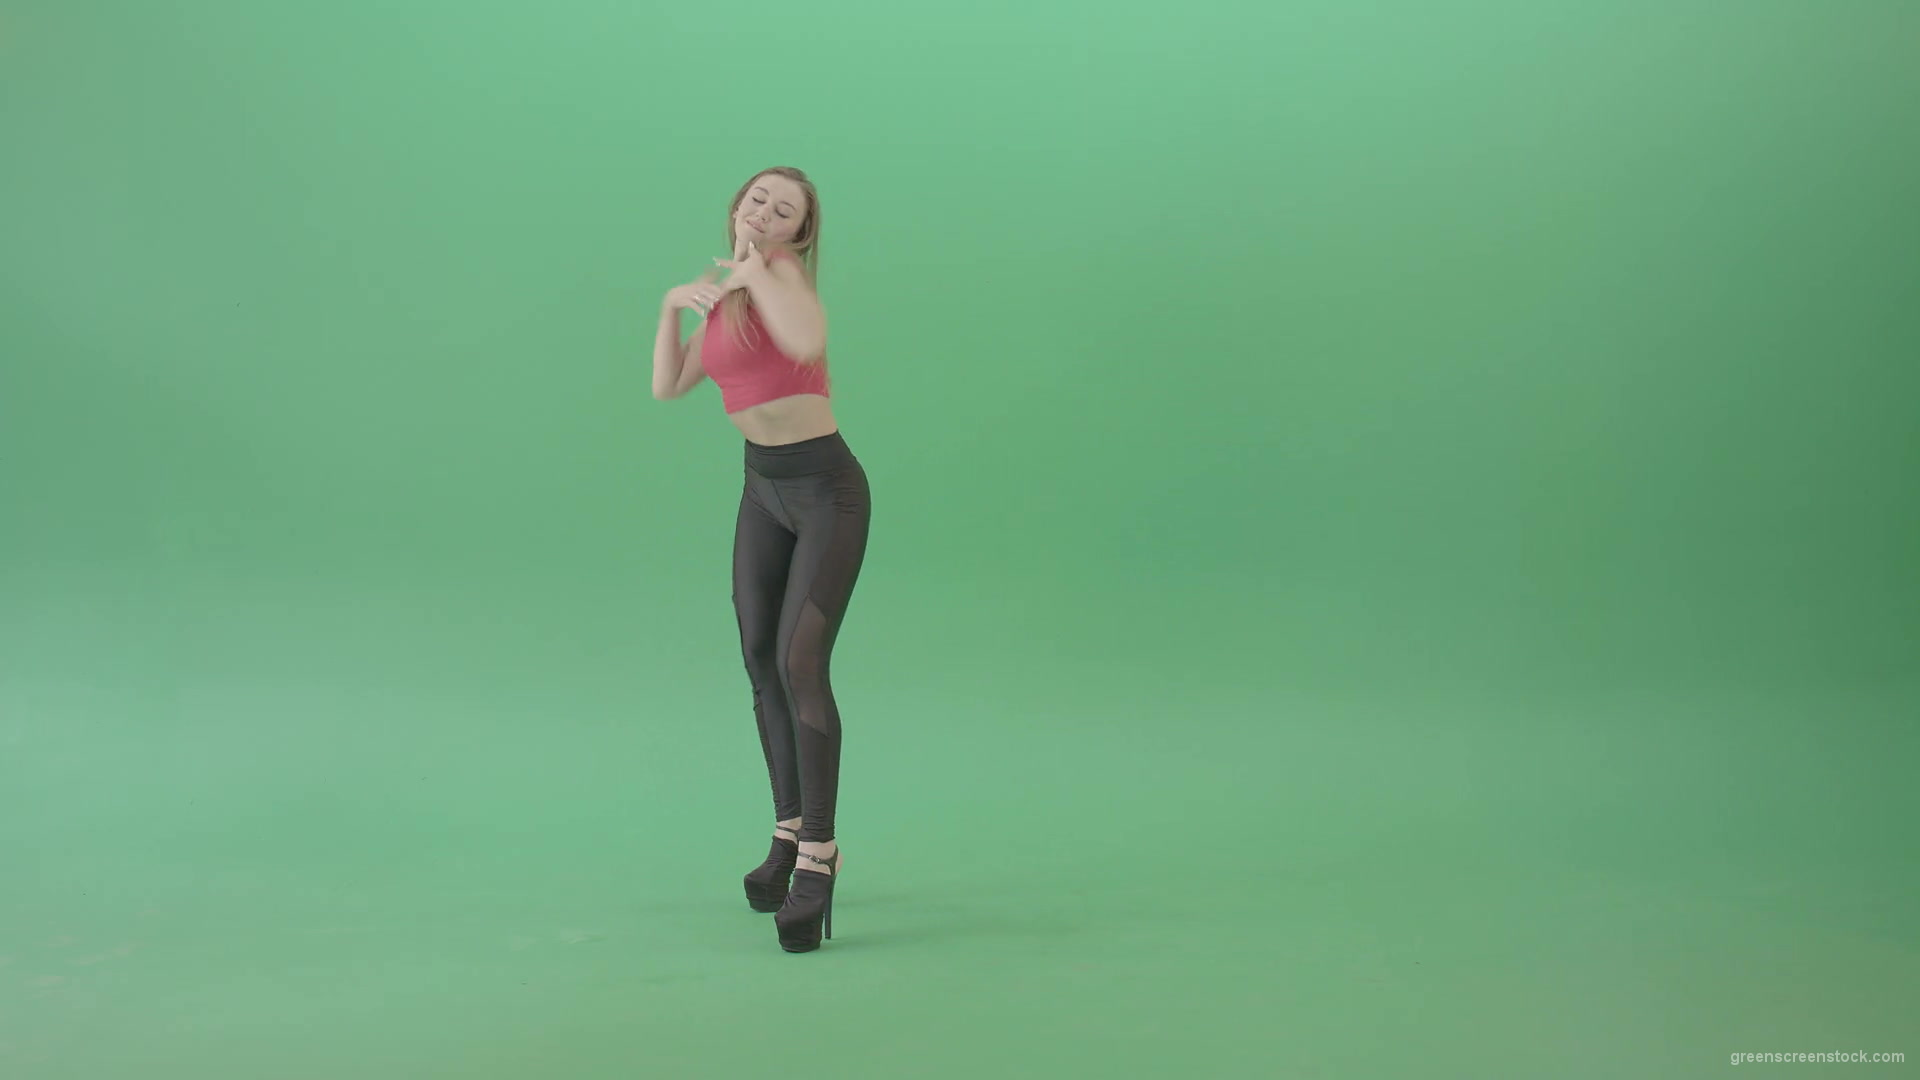 Young-woman-making-squat-on-green-screen-dancing-sexy-moves-4K-Video-Footage-1920_009 Green Screen Stock